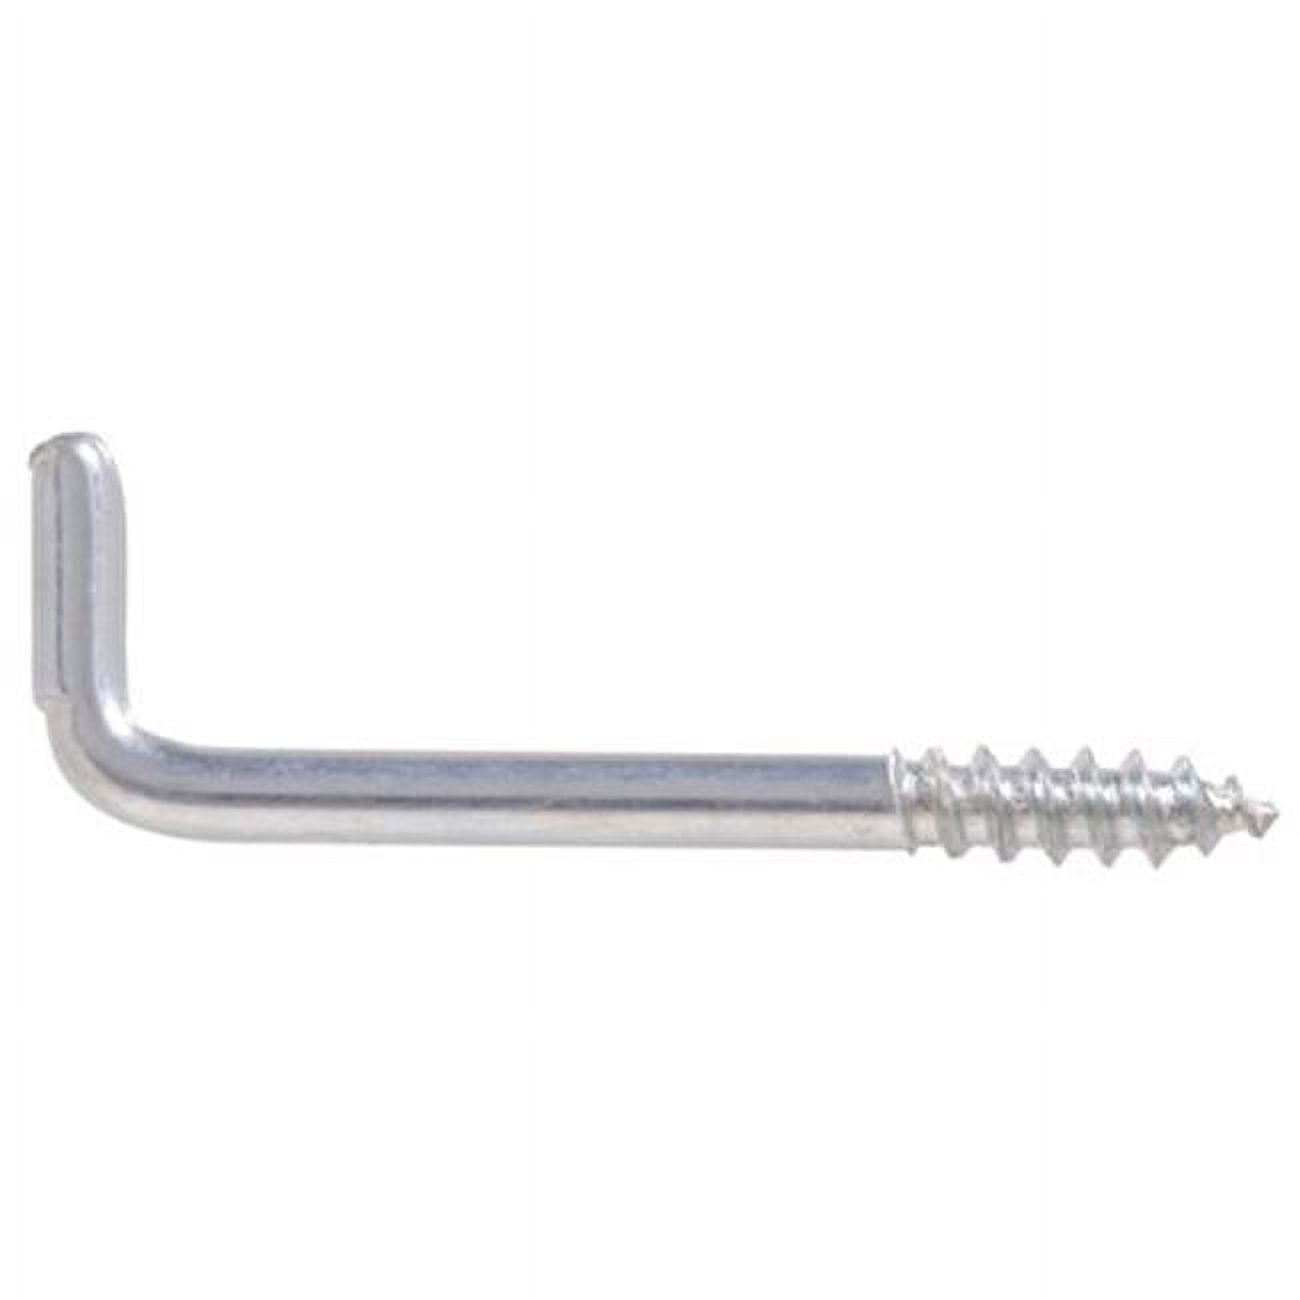 Hillman 852425 0.080 x 1 in. Zinc Plated Square Bend Hook, Pack of 5